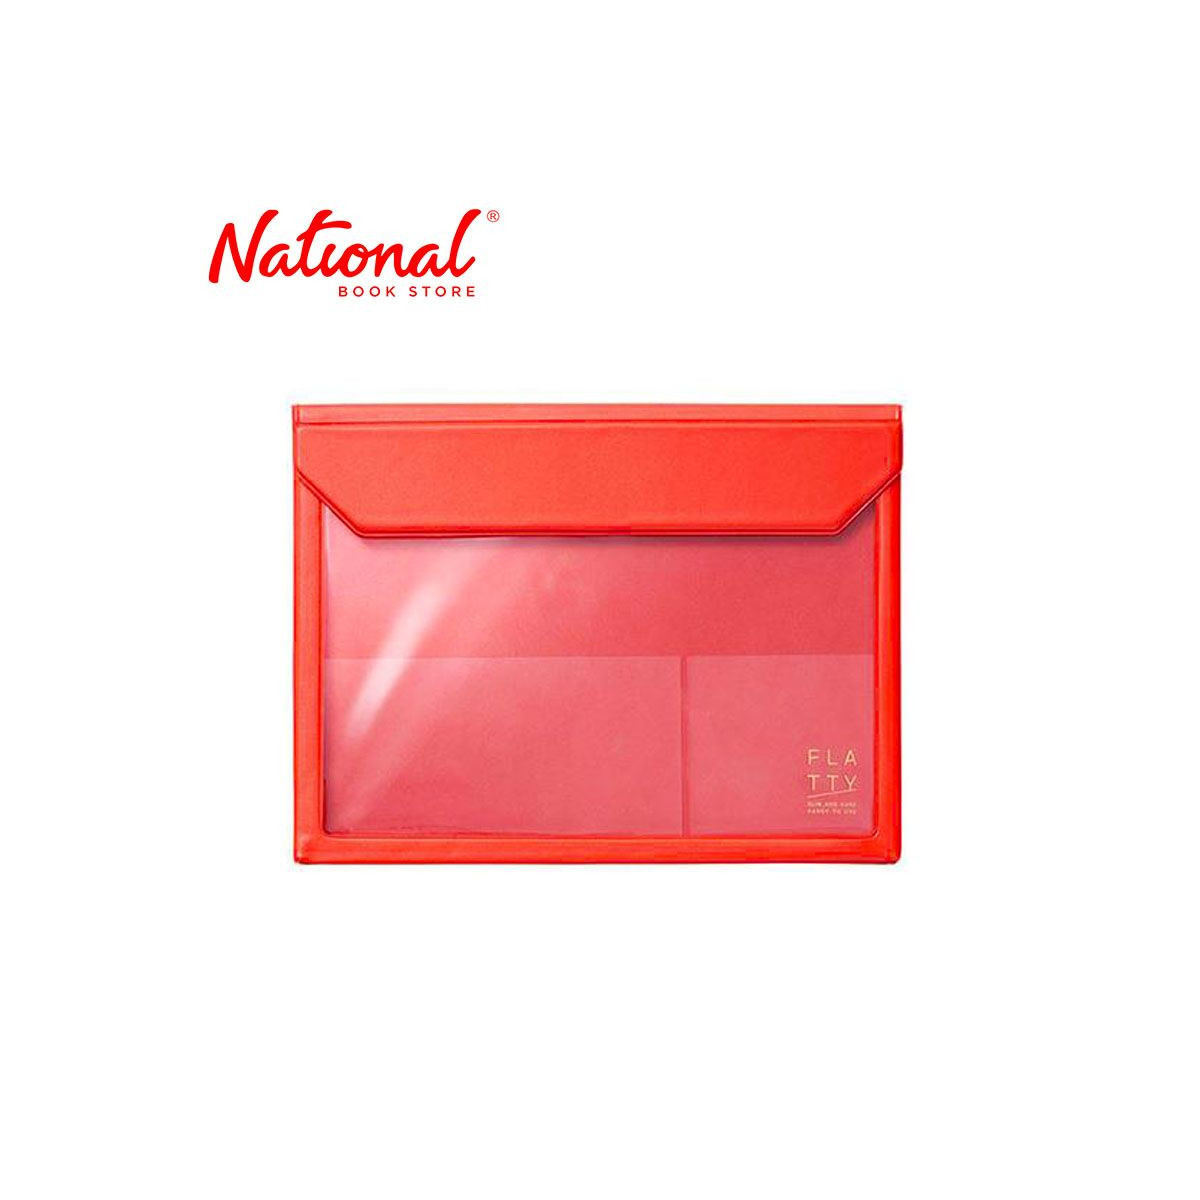 King Jim Plastic Envelope 5364 A5 Magnetic Lock Expandable Red - Office Supplies